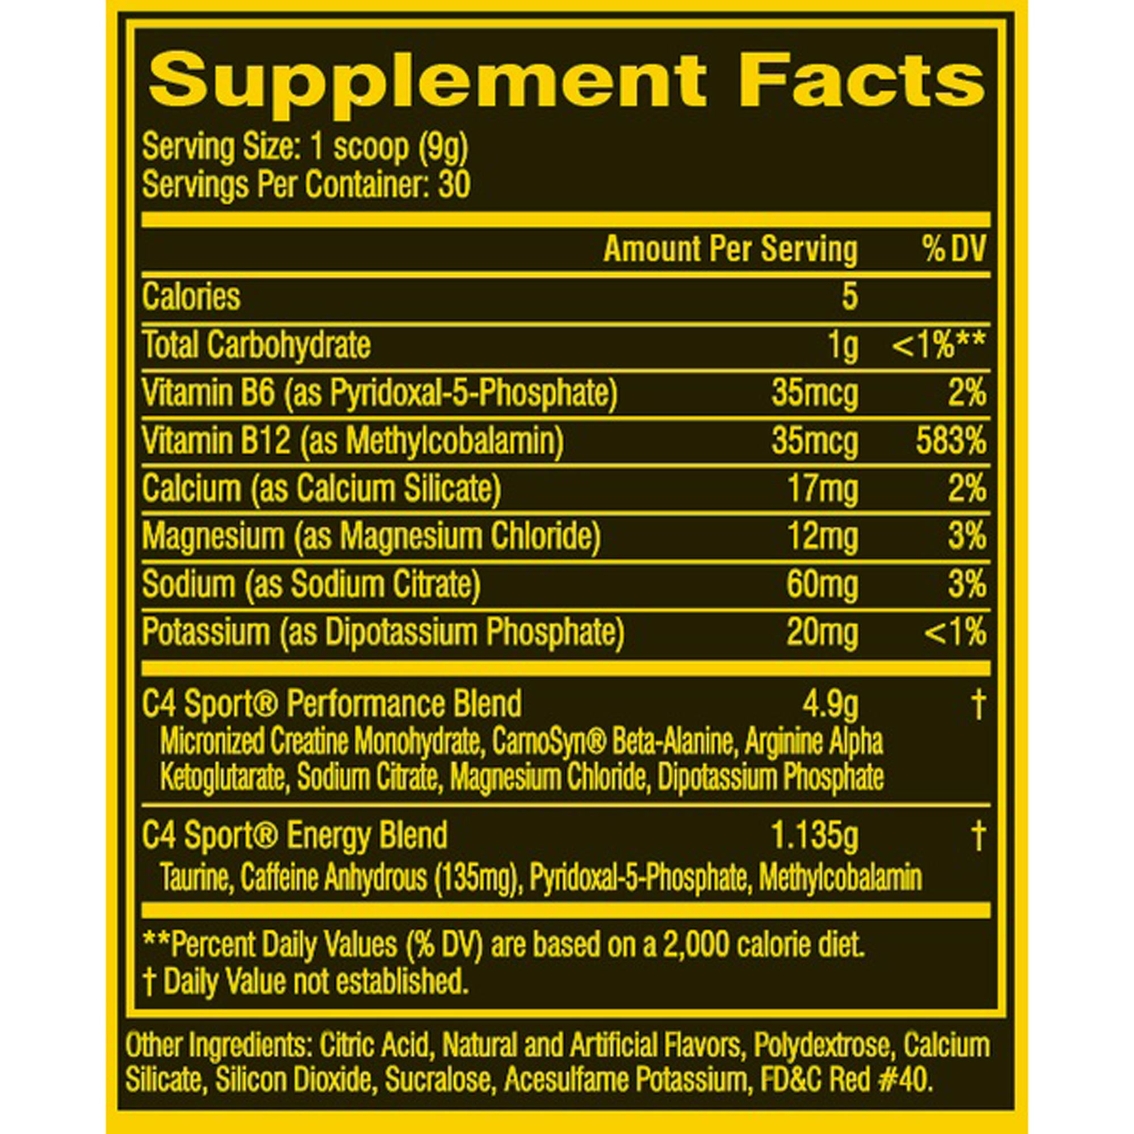 Cellucor C4 Sport Pre-Workout Supplement, 30 Servings - Image 2 of 2